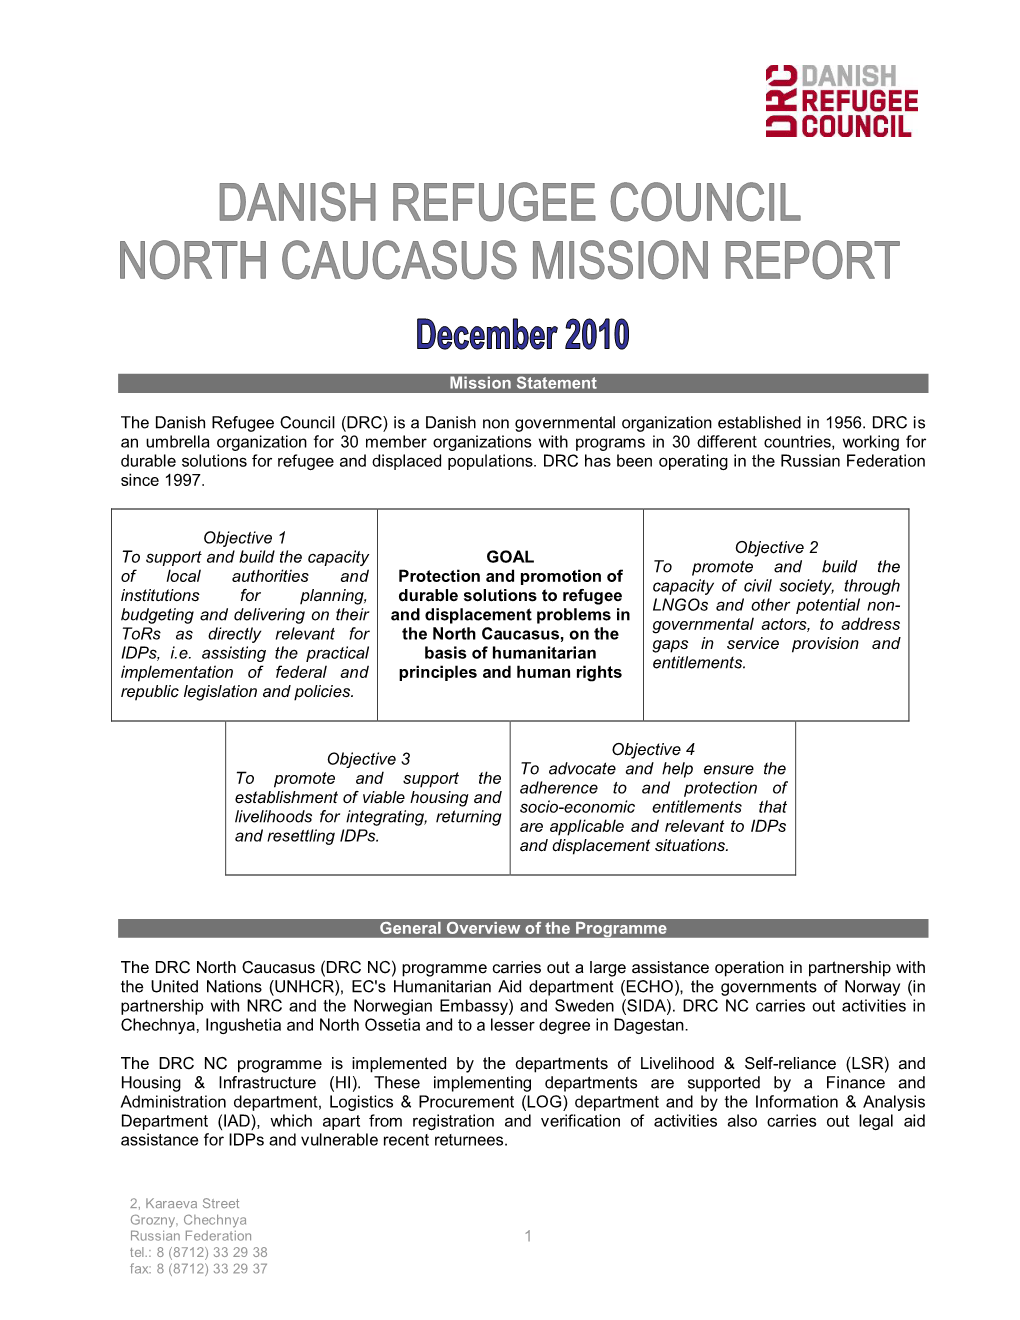 Mission Statement the Danish Refugee Council (DRC)